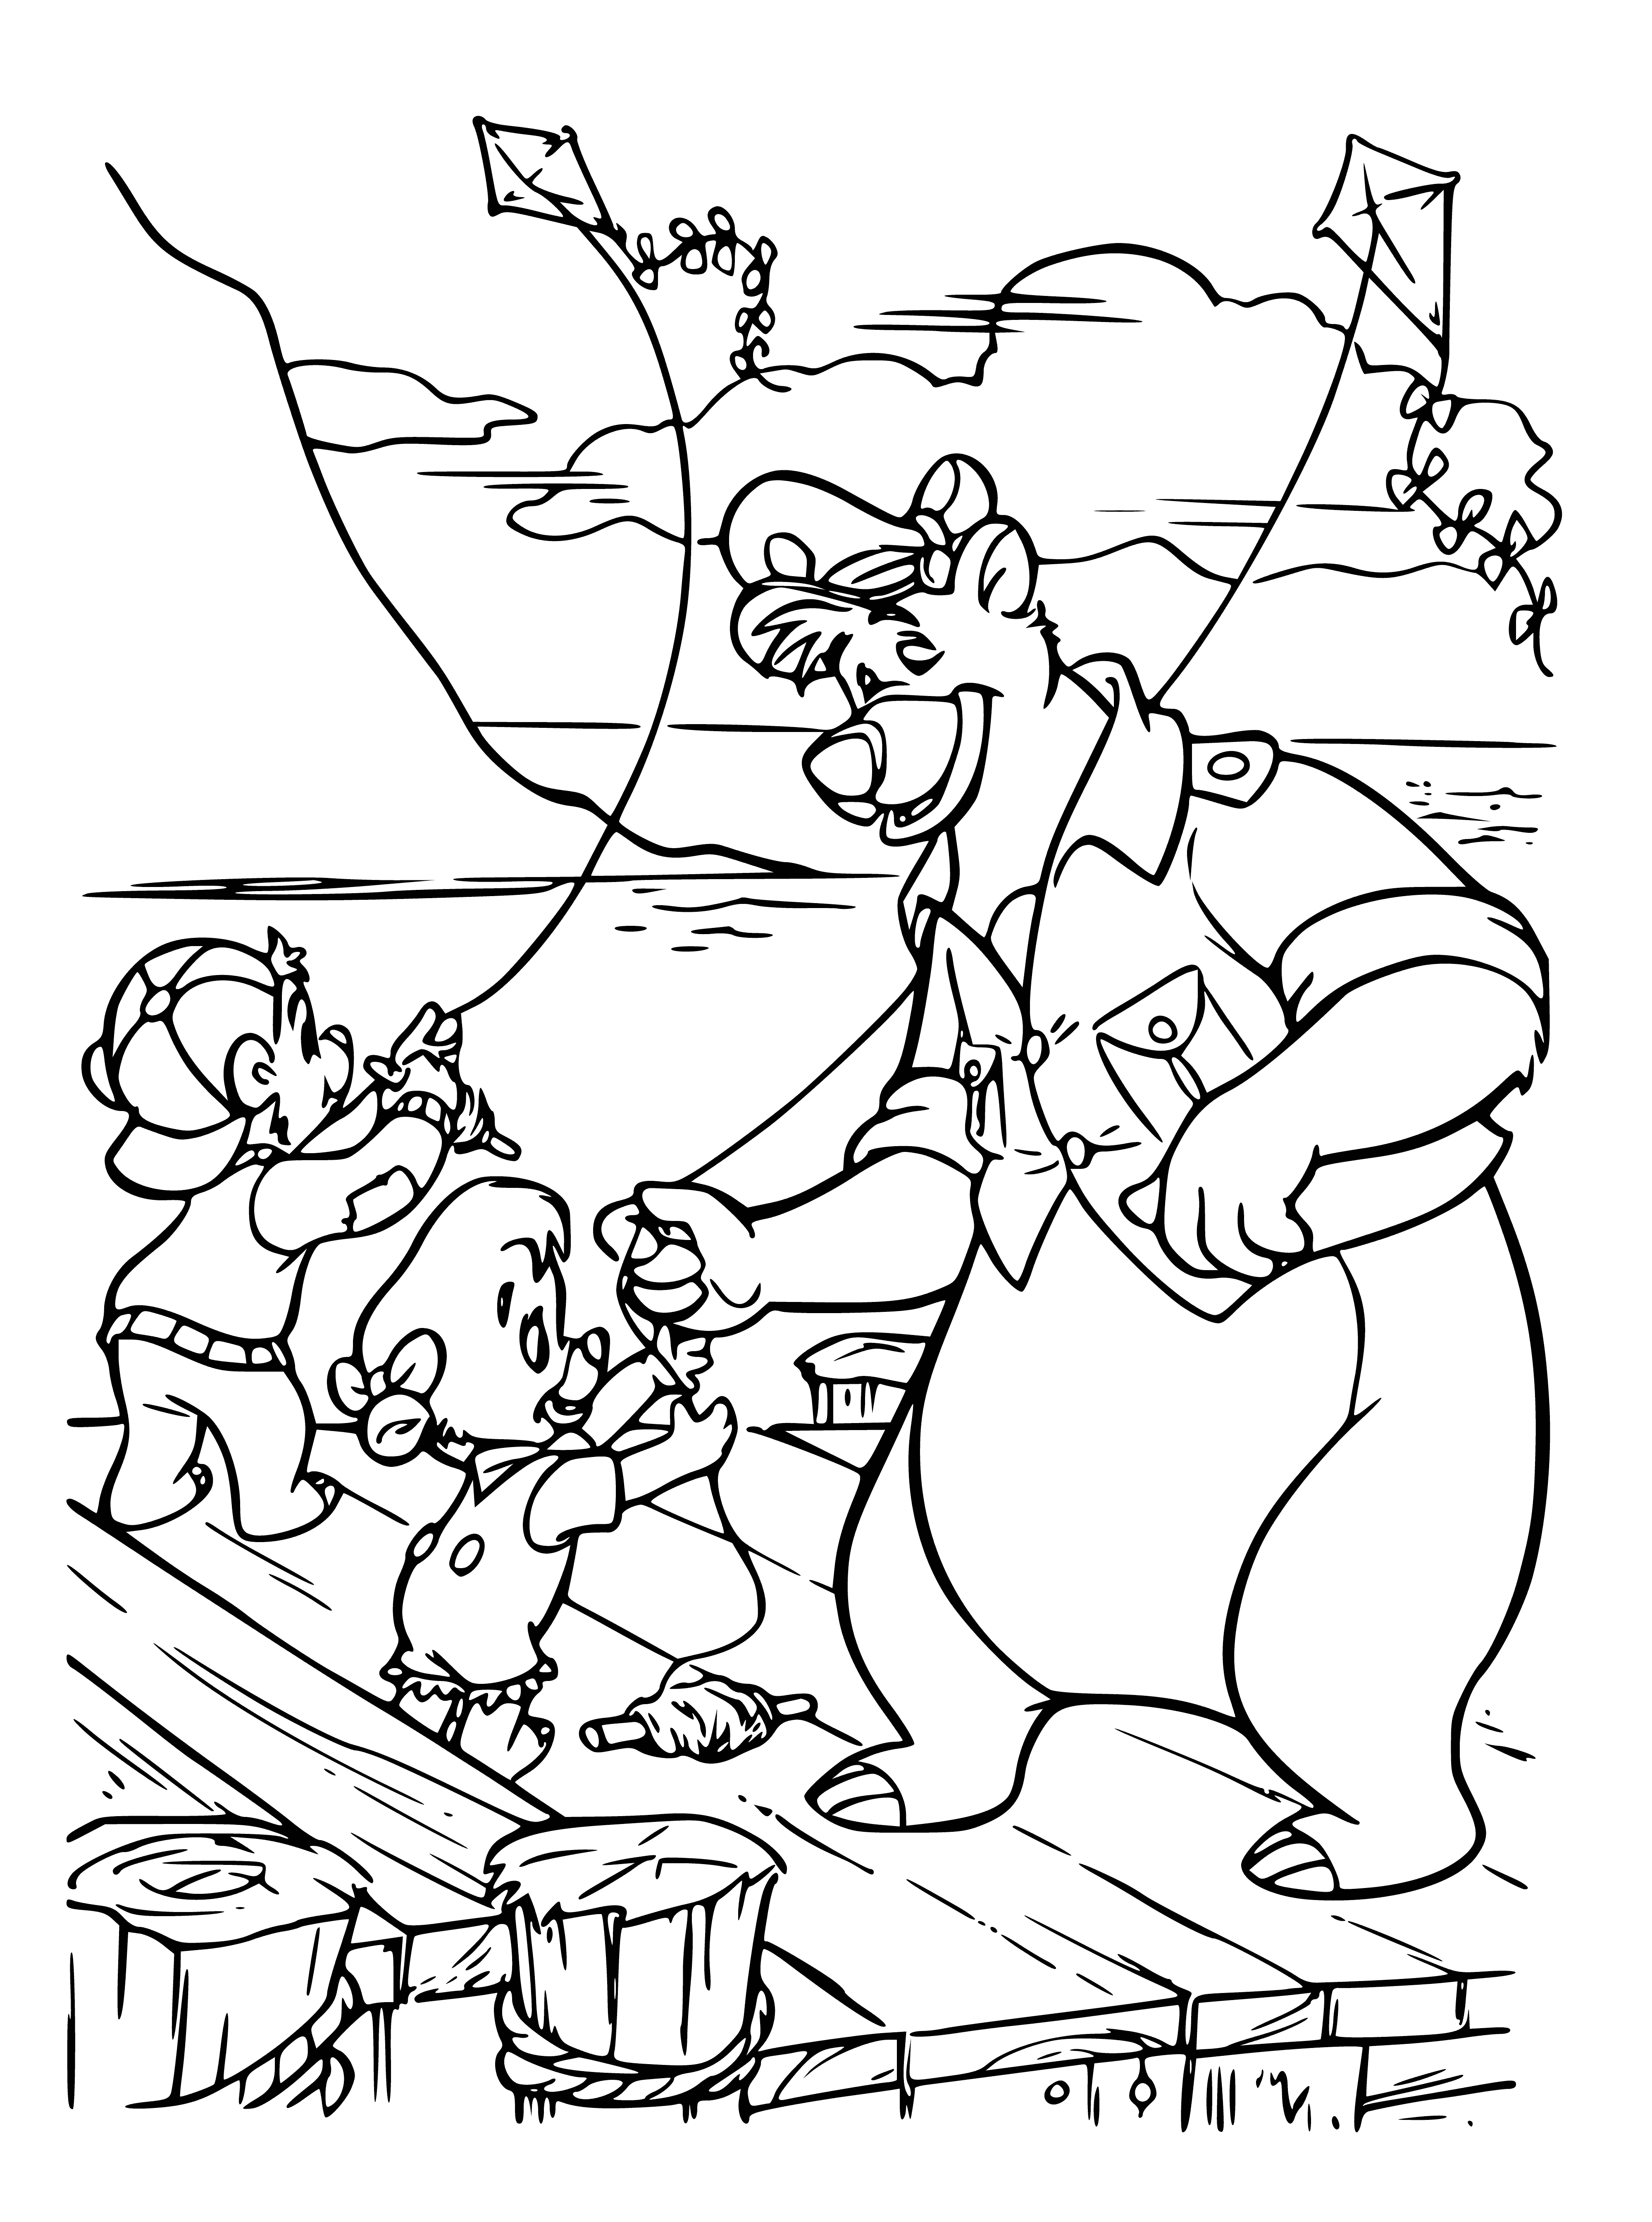 Children fly kites coloring page